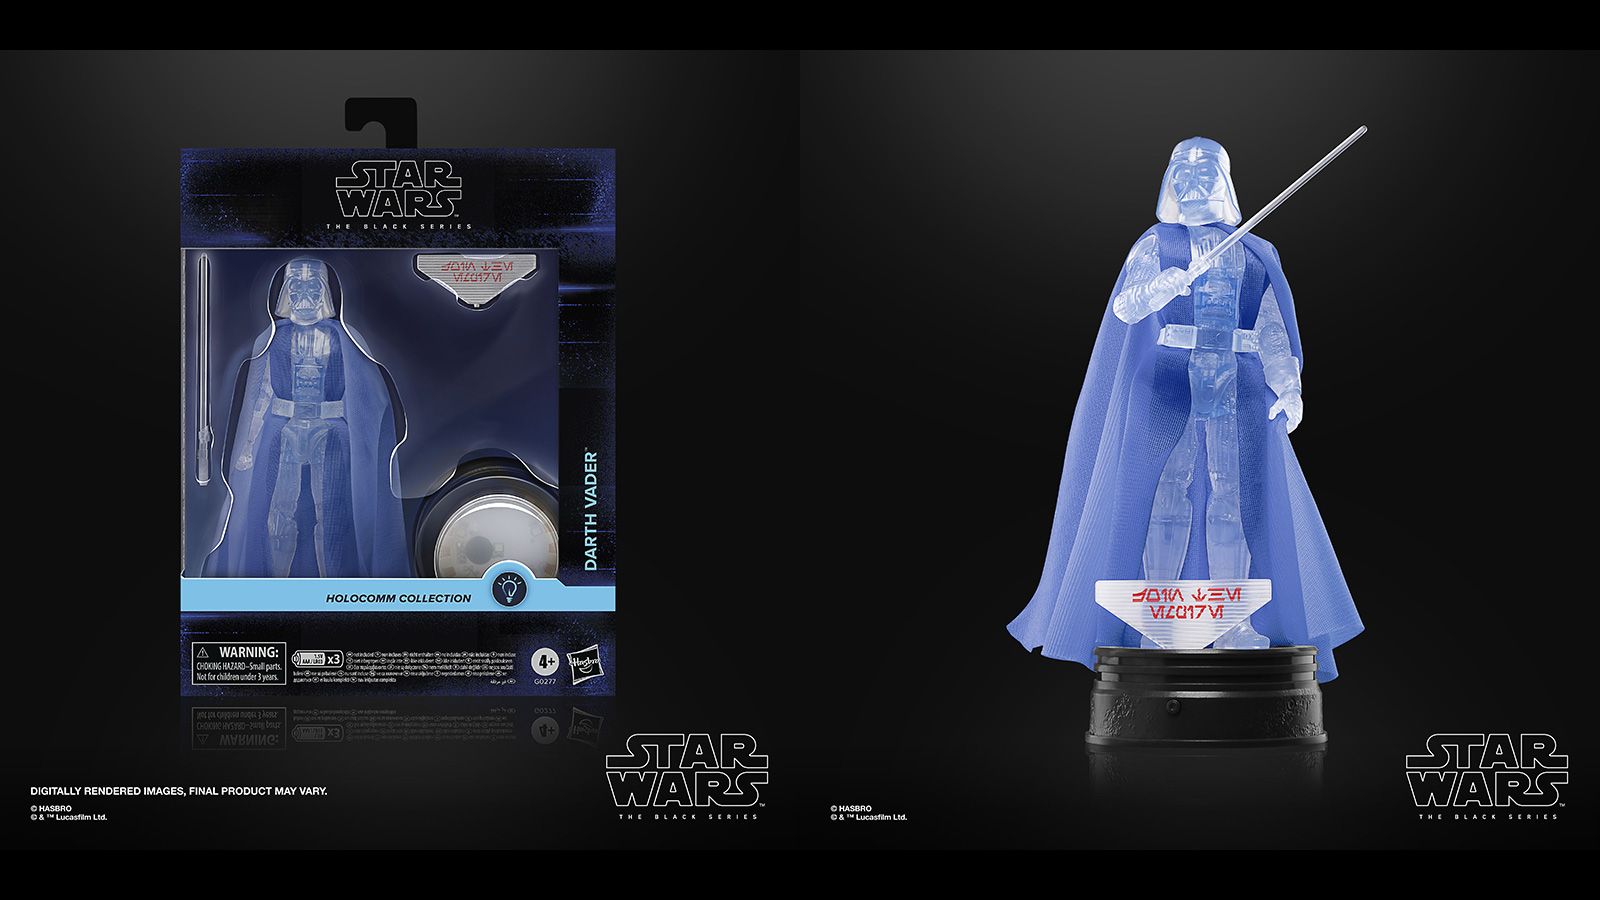 Press Release & Preorder Now - Amazon Exclusive TBS 6-Inch Holocomm Darth Vader